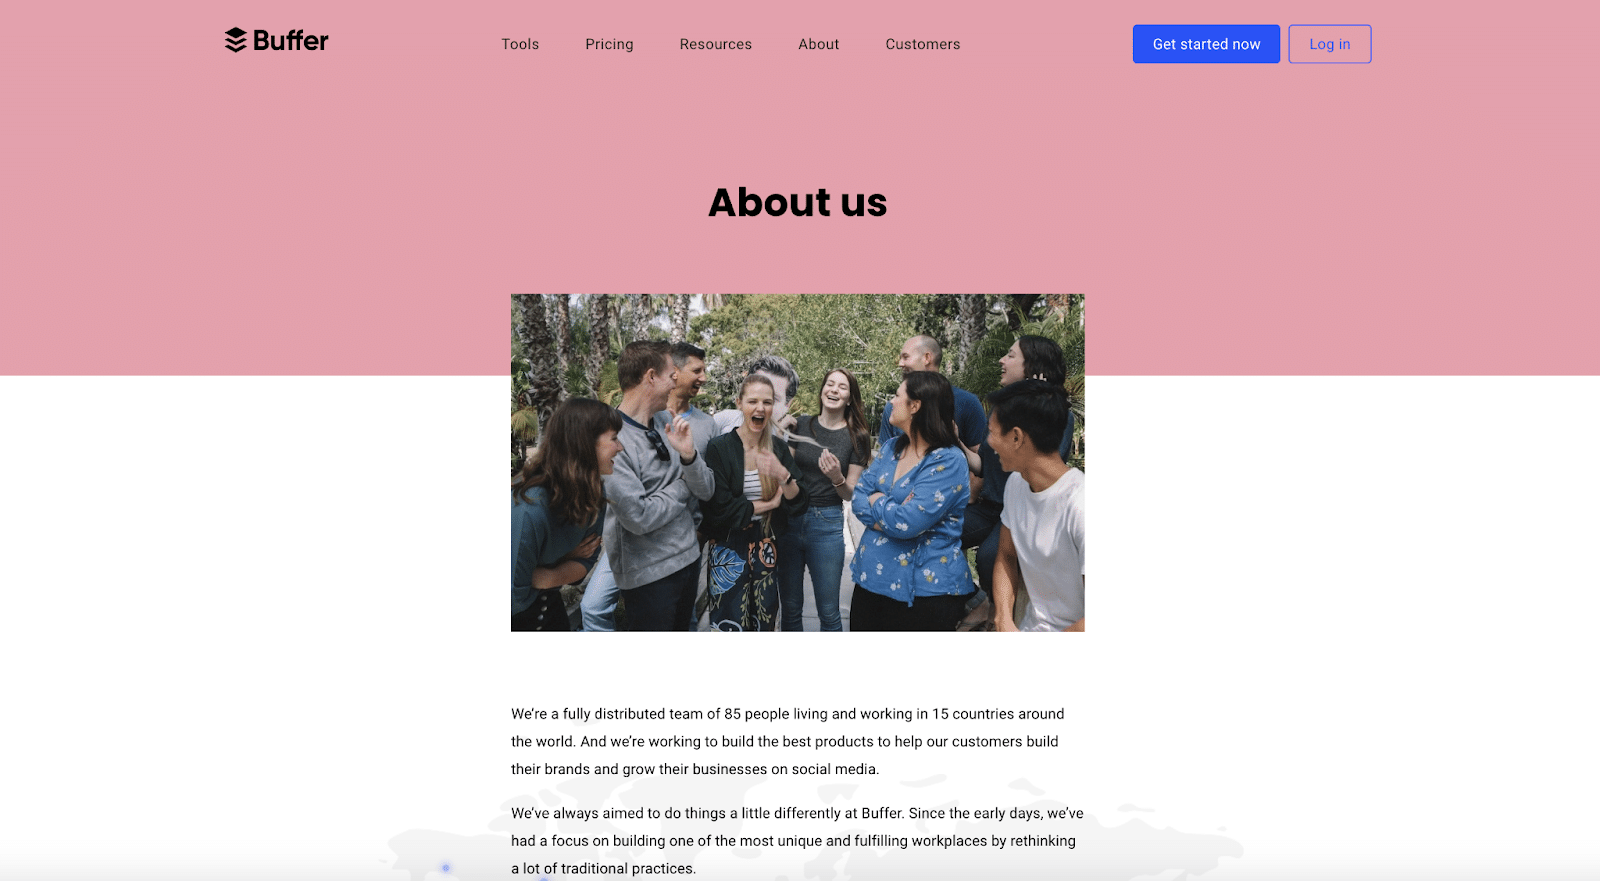 Buffer has an About Us page that focuses on its stellar team